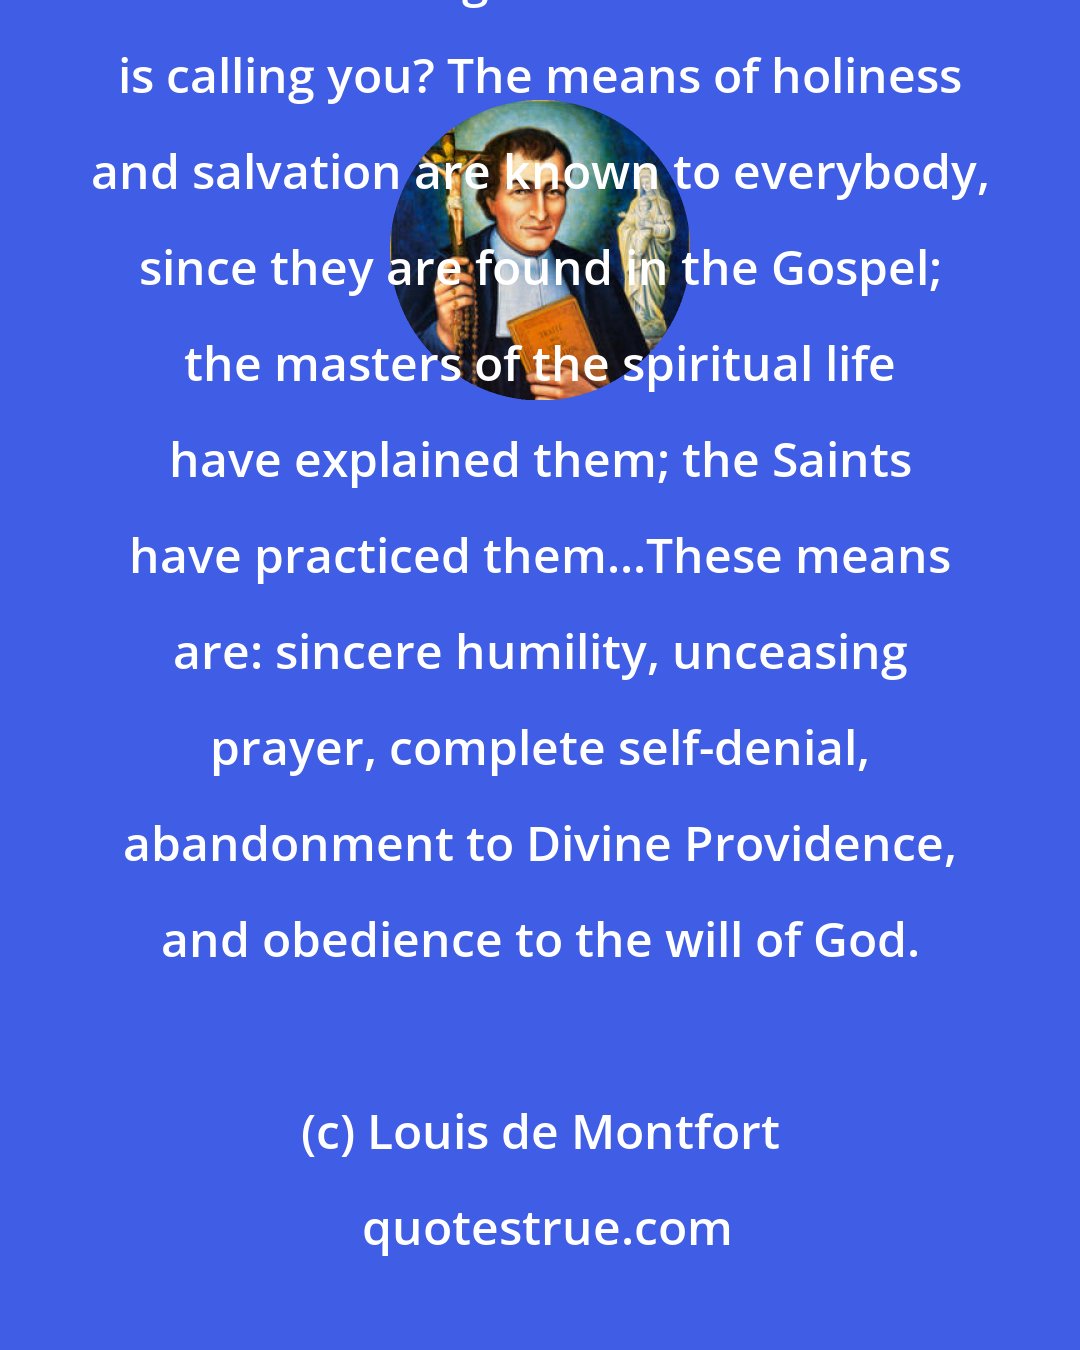 Louis de Montfort: Chosen soul, how will you bring this about? What steps will you take to reach the high level to which God is calling you? The means of holiness and salvation are known to everybody, since they are found in the Gospel; the masters of the spiritual life have explained them; the Saints have practiced them...These means are: sincere humility, unceasing prayer, complete self-denial, abandonment to Divine Providence, and obedience to the will of God.